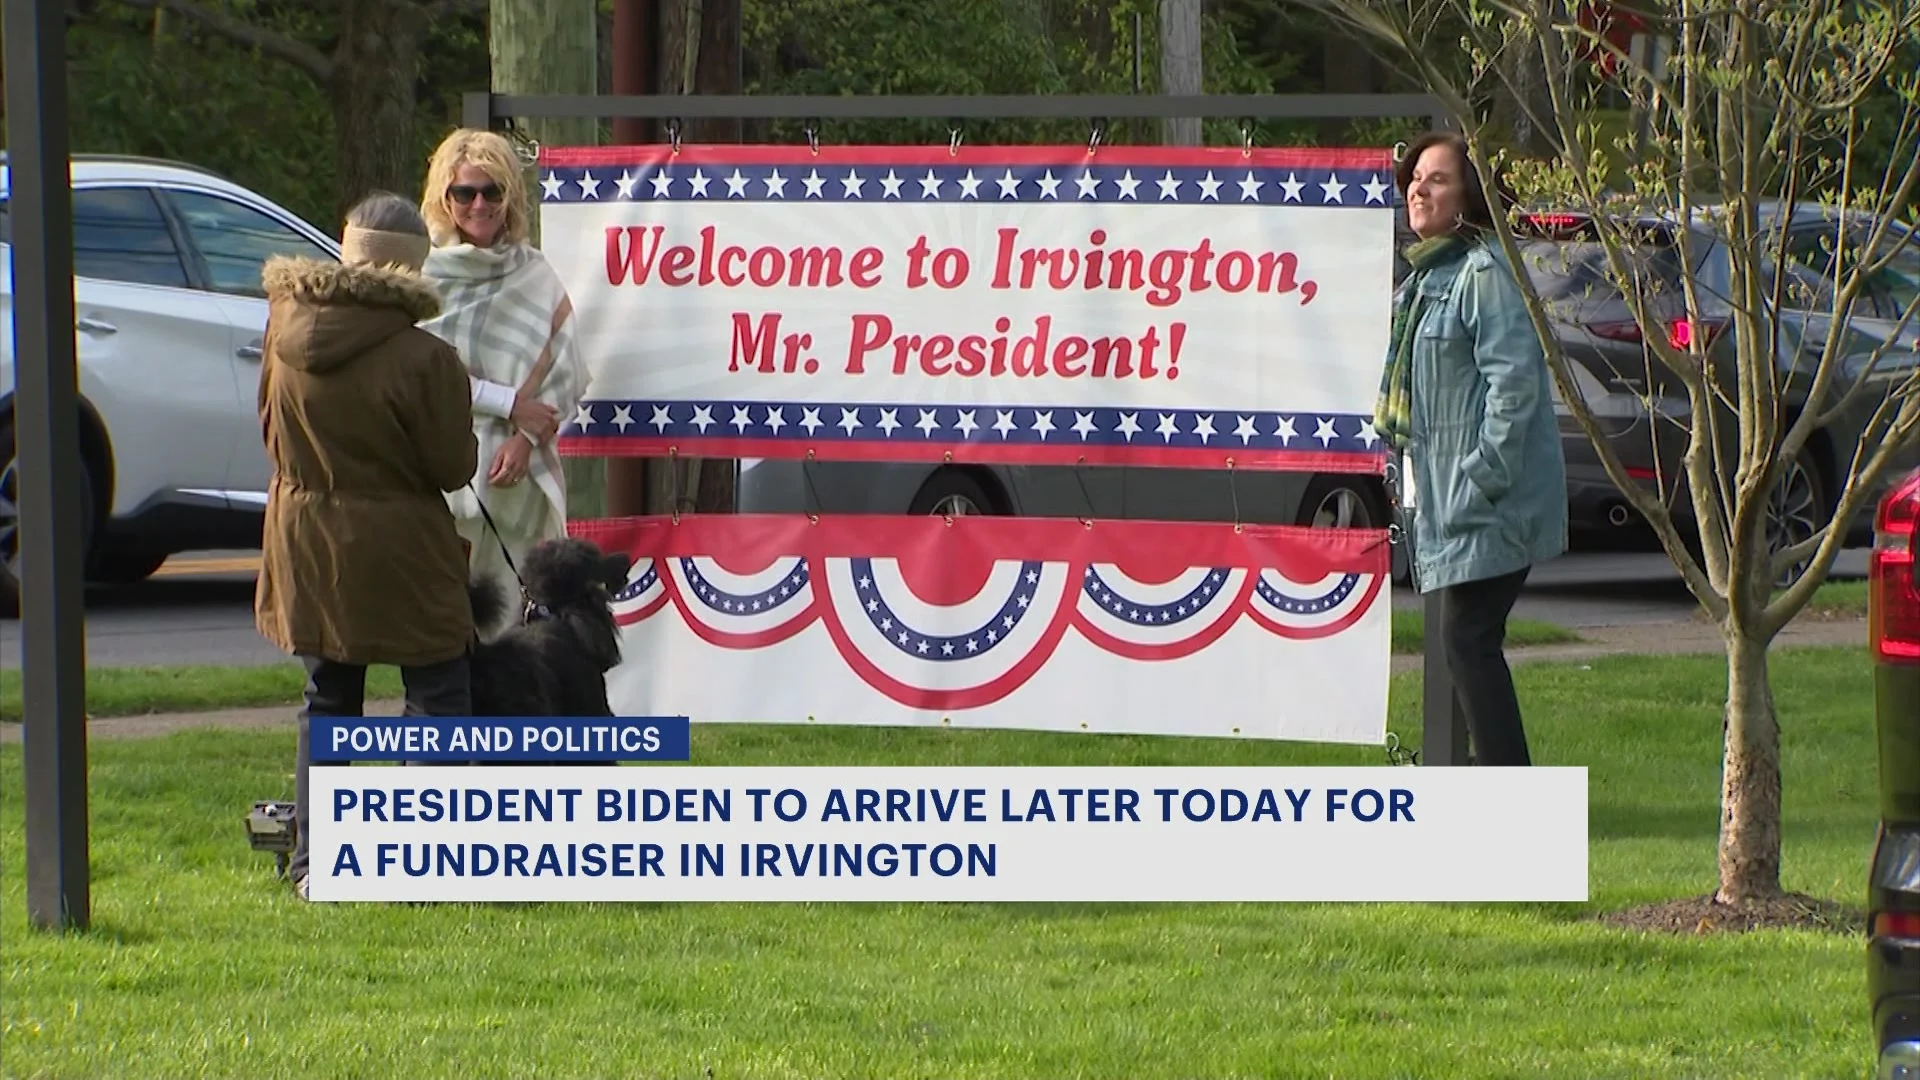 Traffic delays and road closures expected as Irvington set to host President Joe Biden today